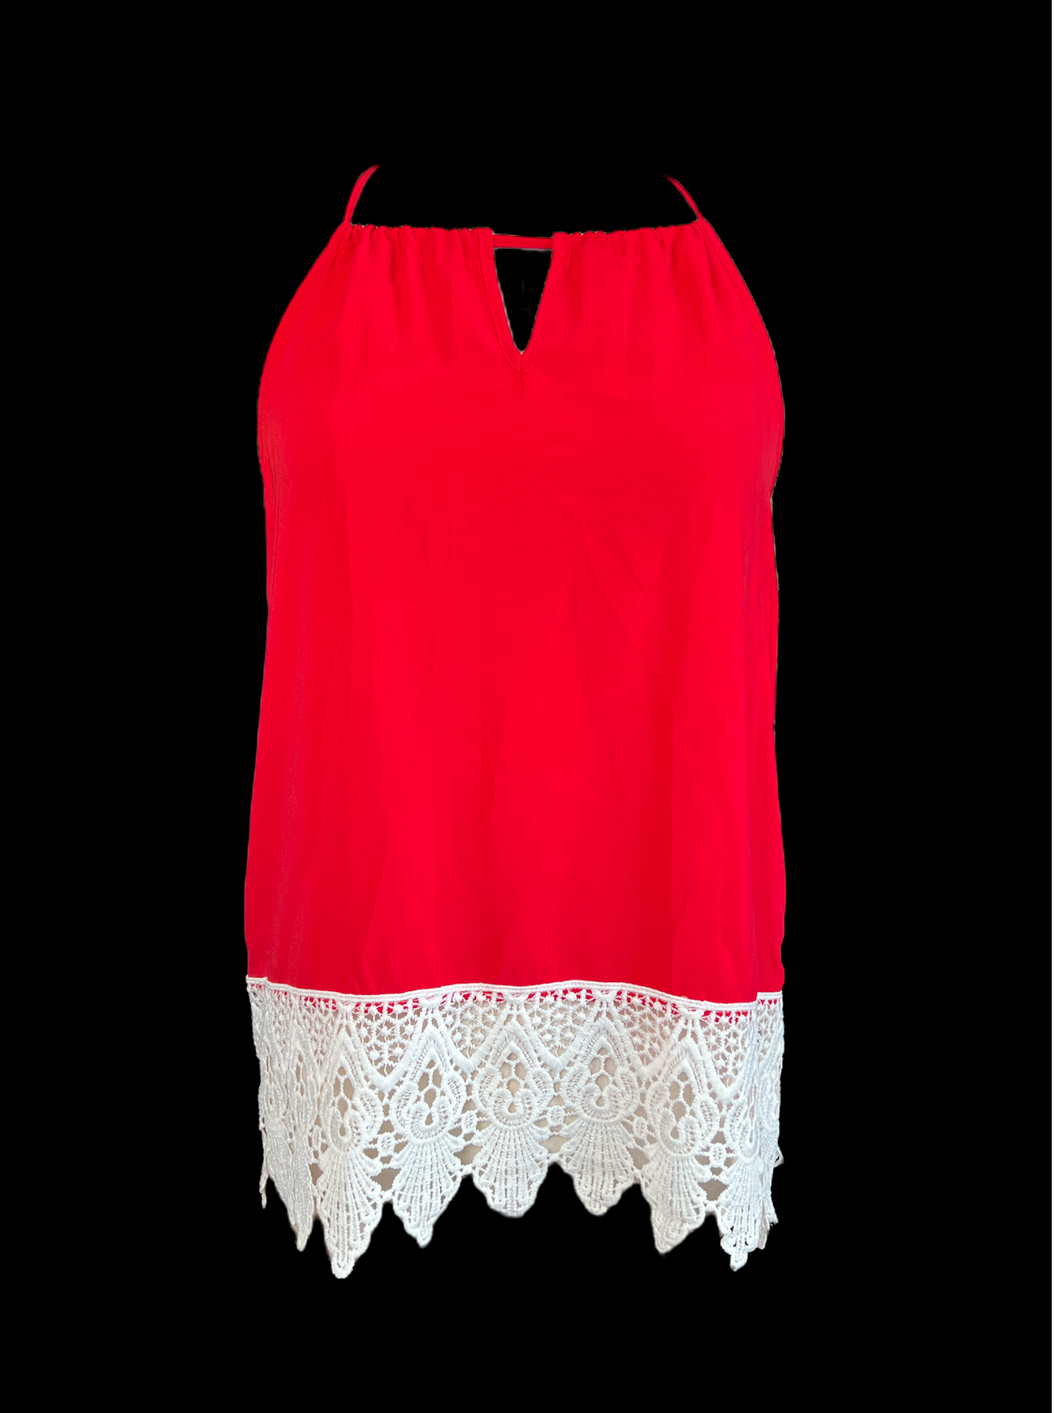 M Red sleeveless halter top w/ white lace back & trim, & tie on back